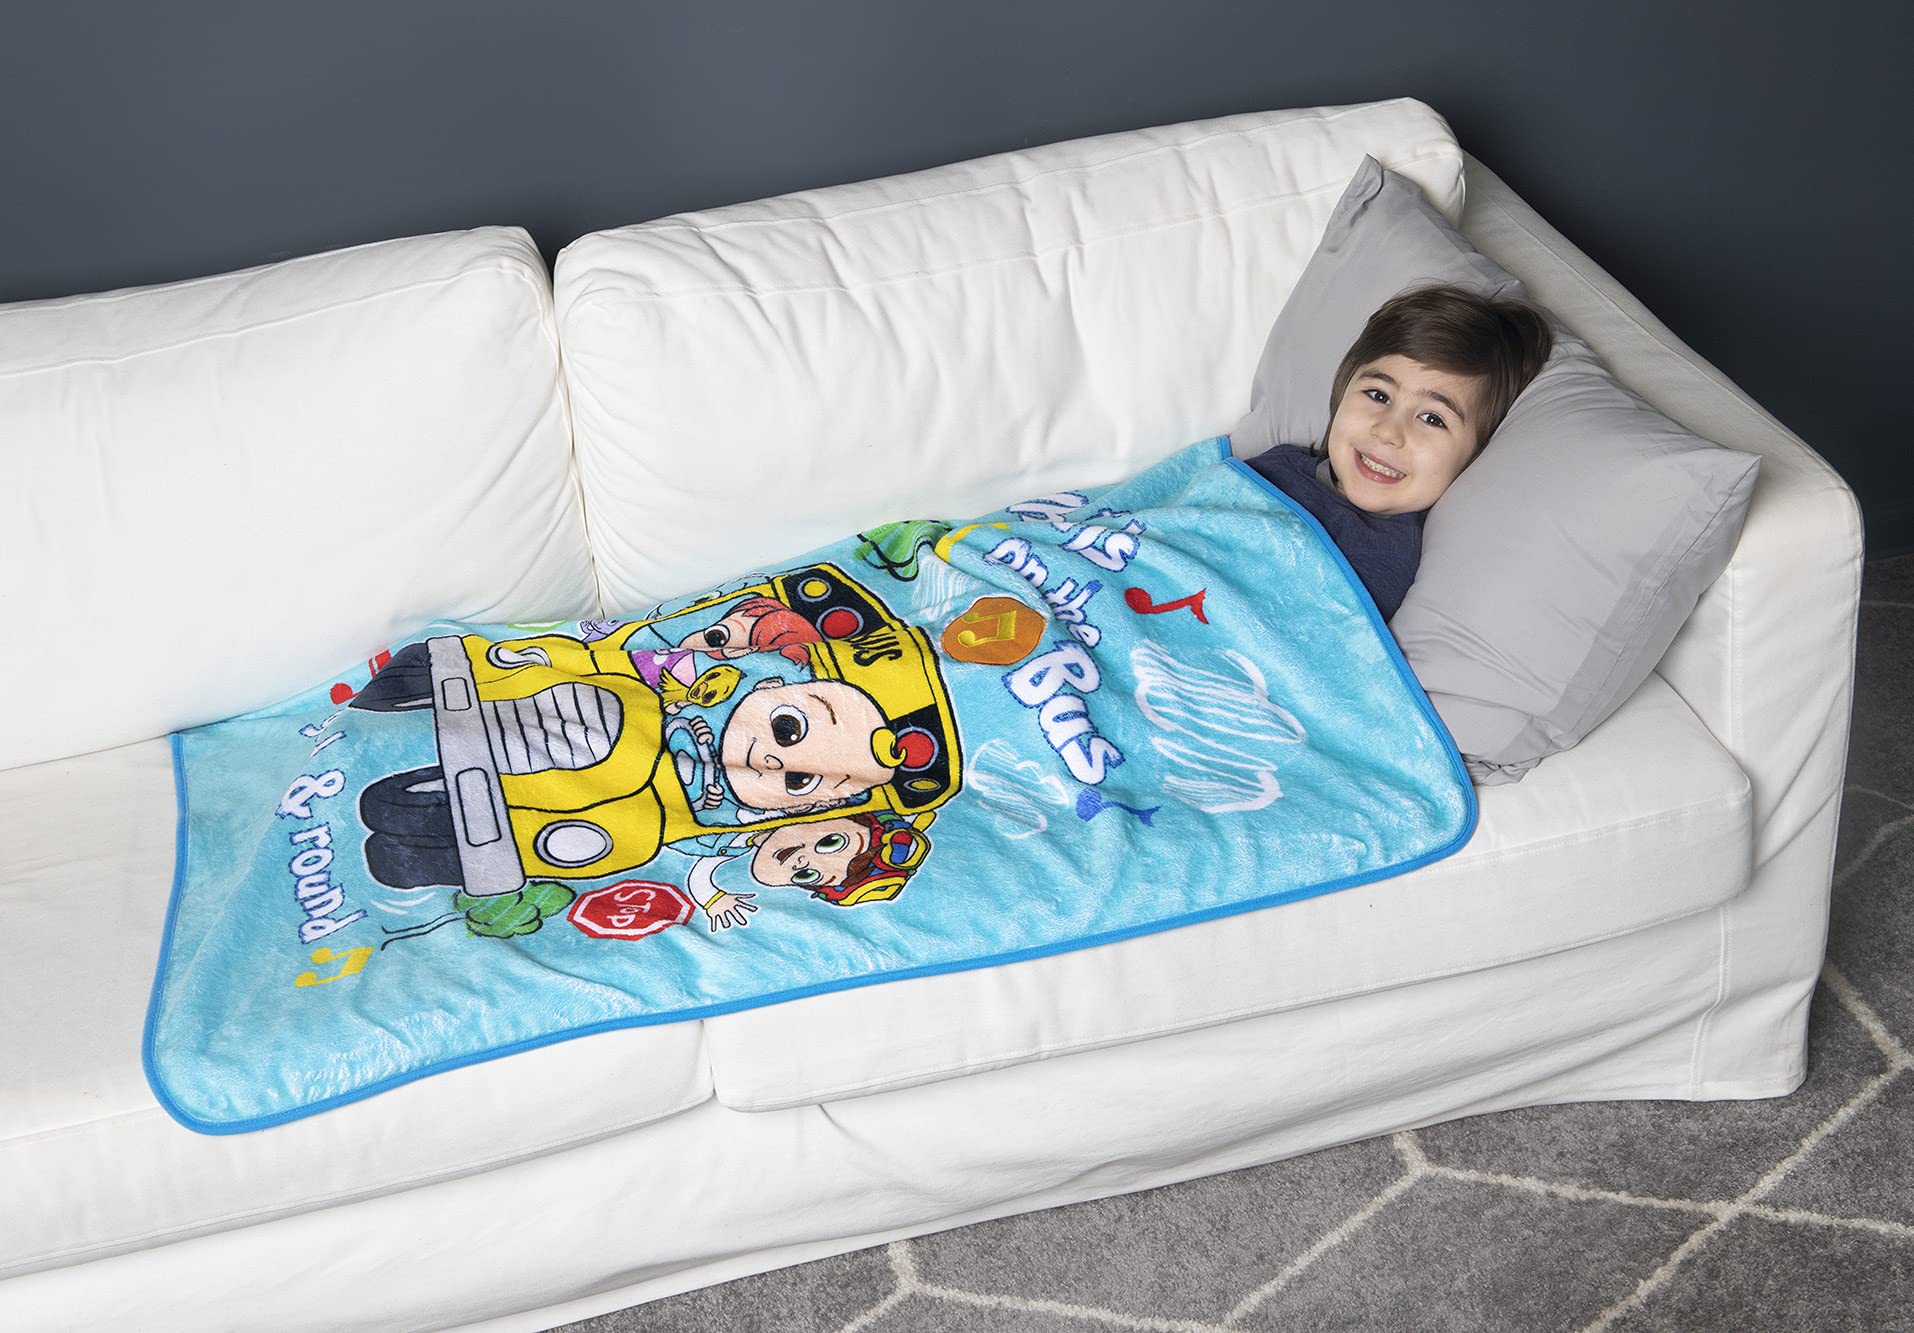 CoComelon Warm, Plush, Throw Blanket - Extra Cozy and Comfy for Your Toddler, Blue